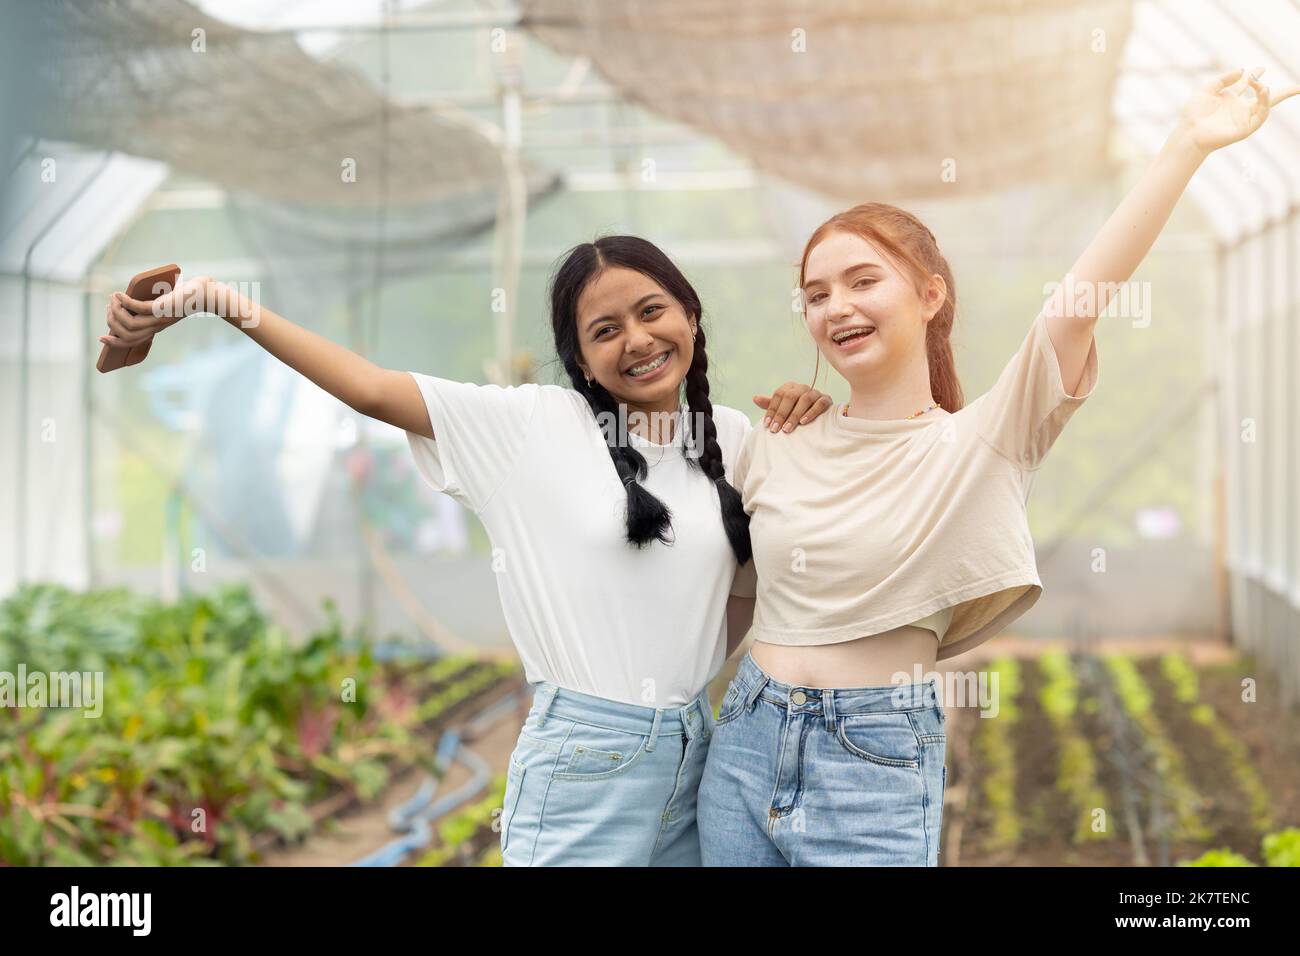 two young teen mixrace friend happy cheerful together in agriculture farm background Stock Photo